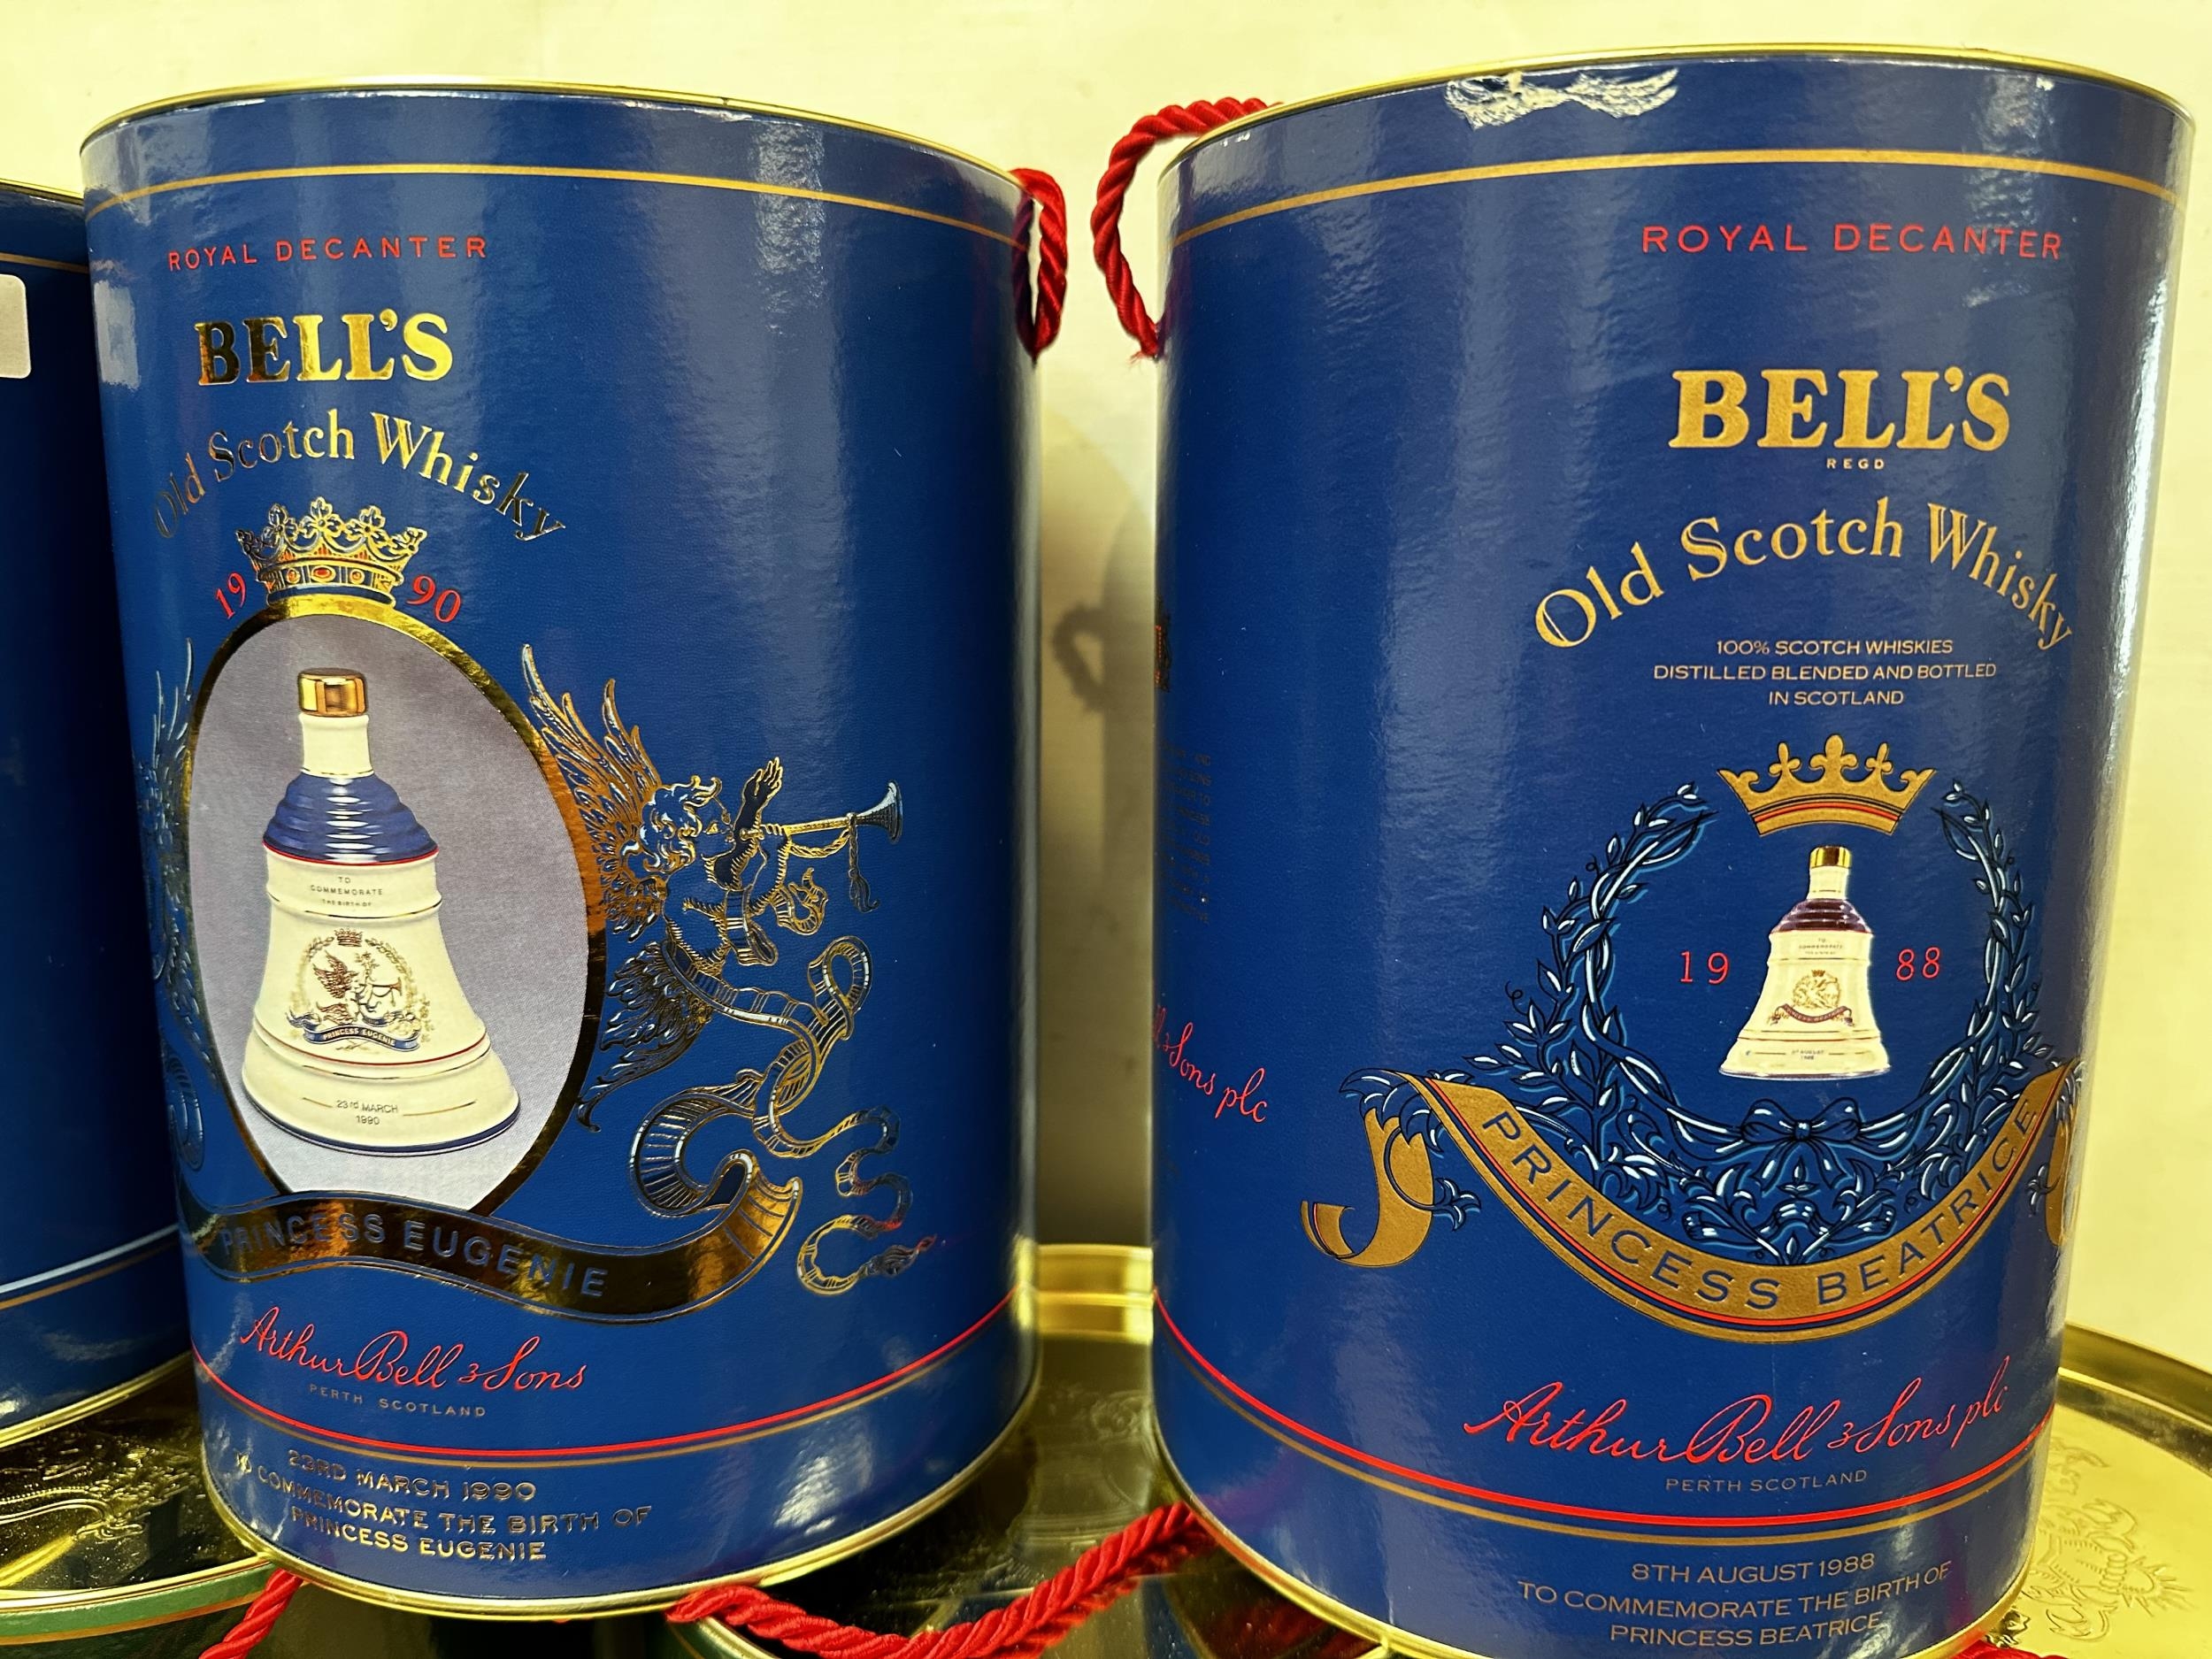 Seven bottle of Bells Royal Decanter Old Scotch Whiskey. All in presentation tins. - Image 5 of 6